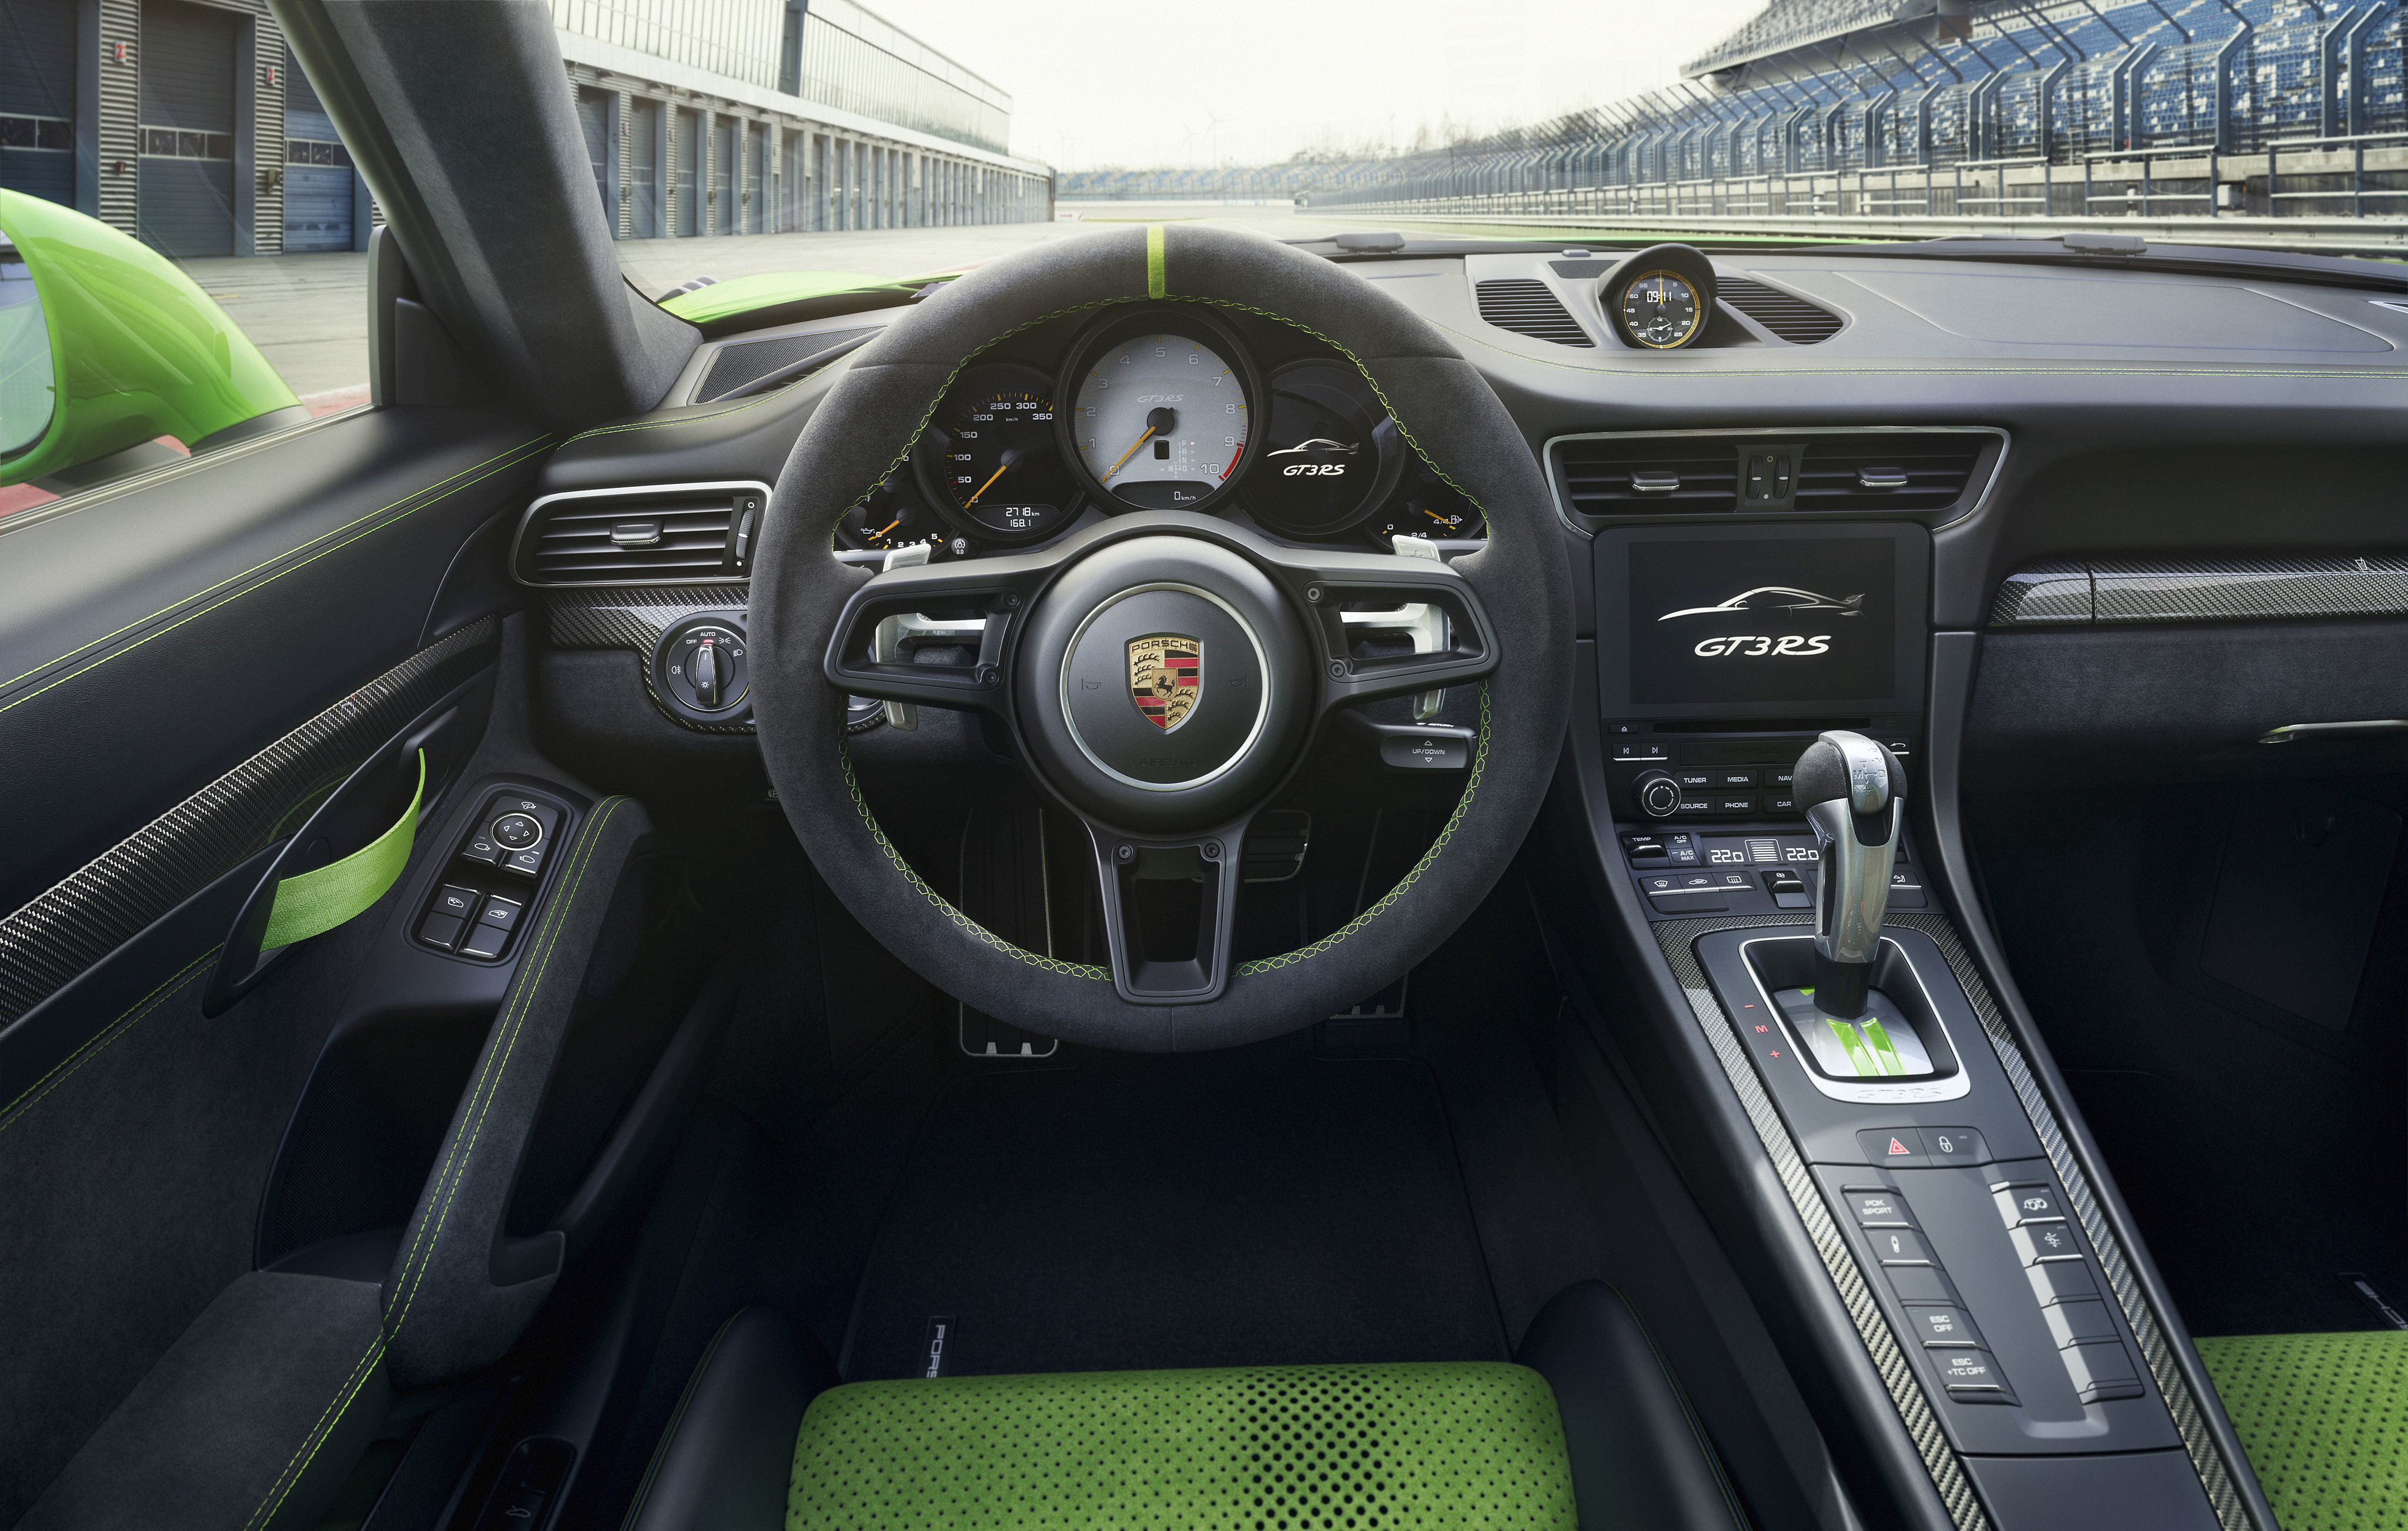 Porsche 911 GT3 RS 2018 Interior, HD Cars, 4k Wallpapers, Images